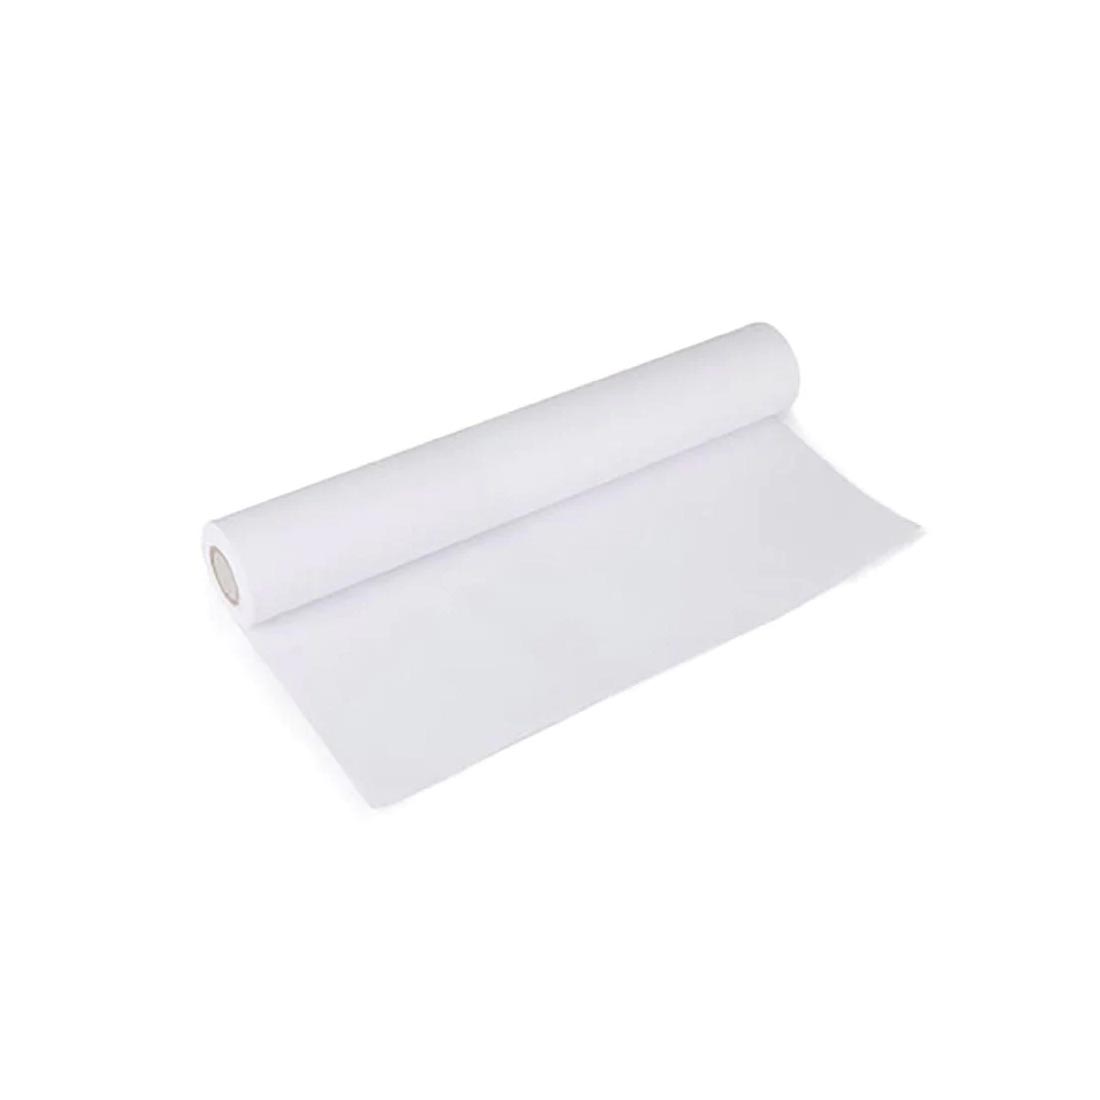 15" Art Paper Replacement Roll By Hape